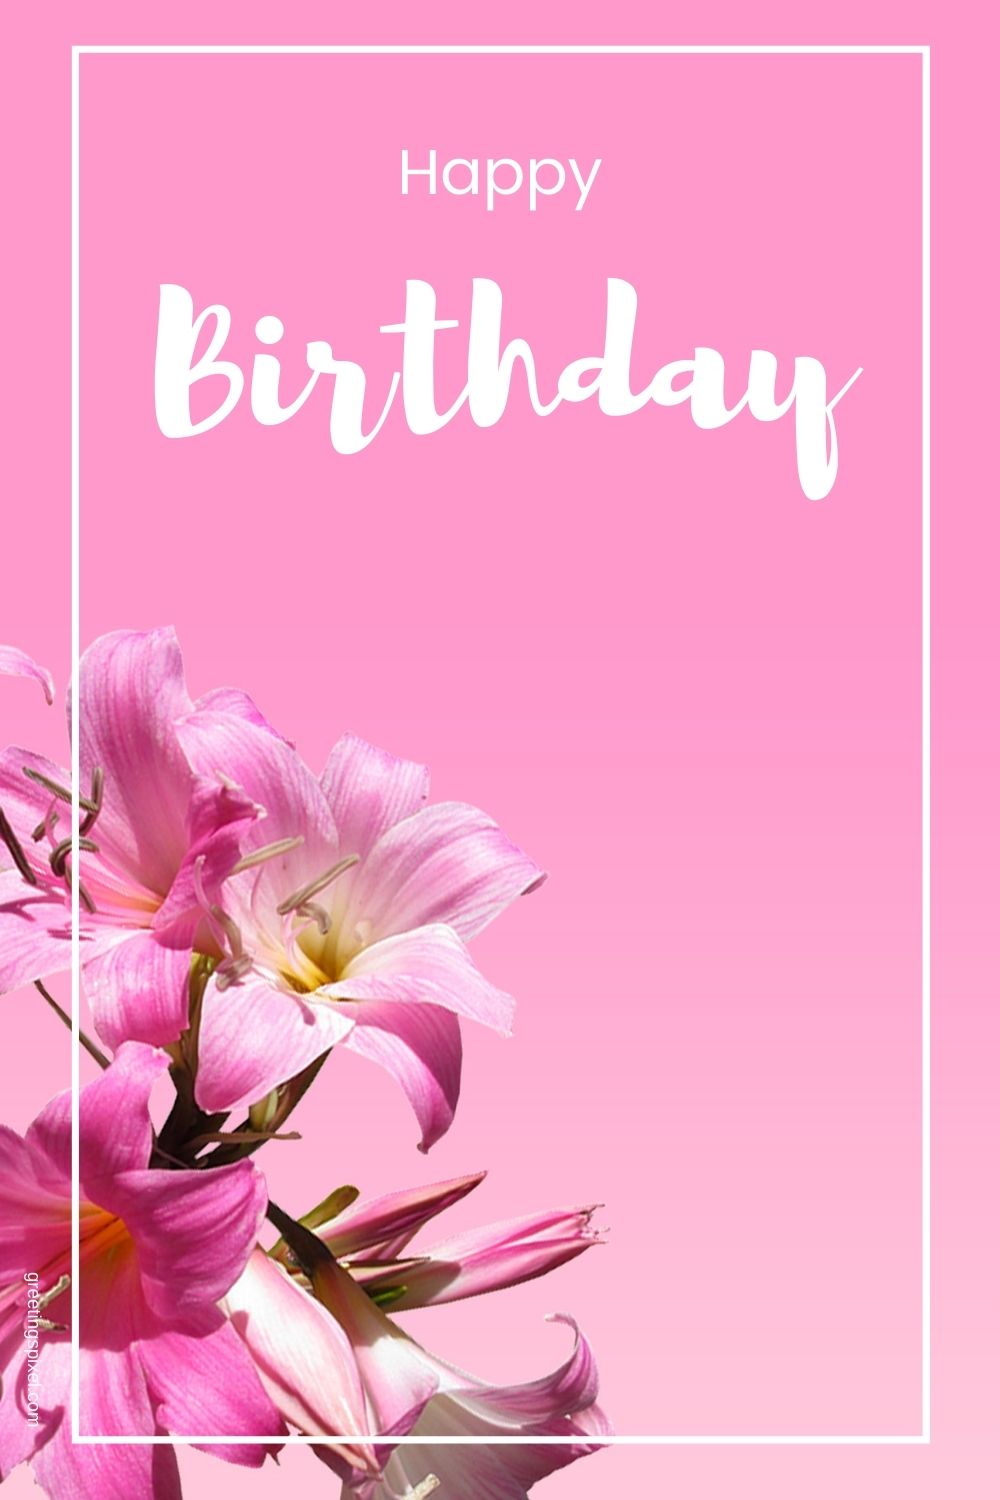 happy birthday images flowers hd